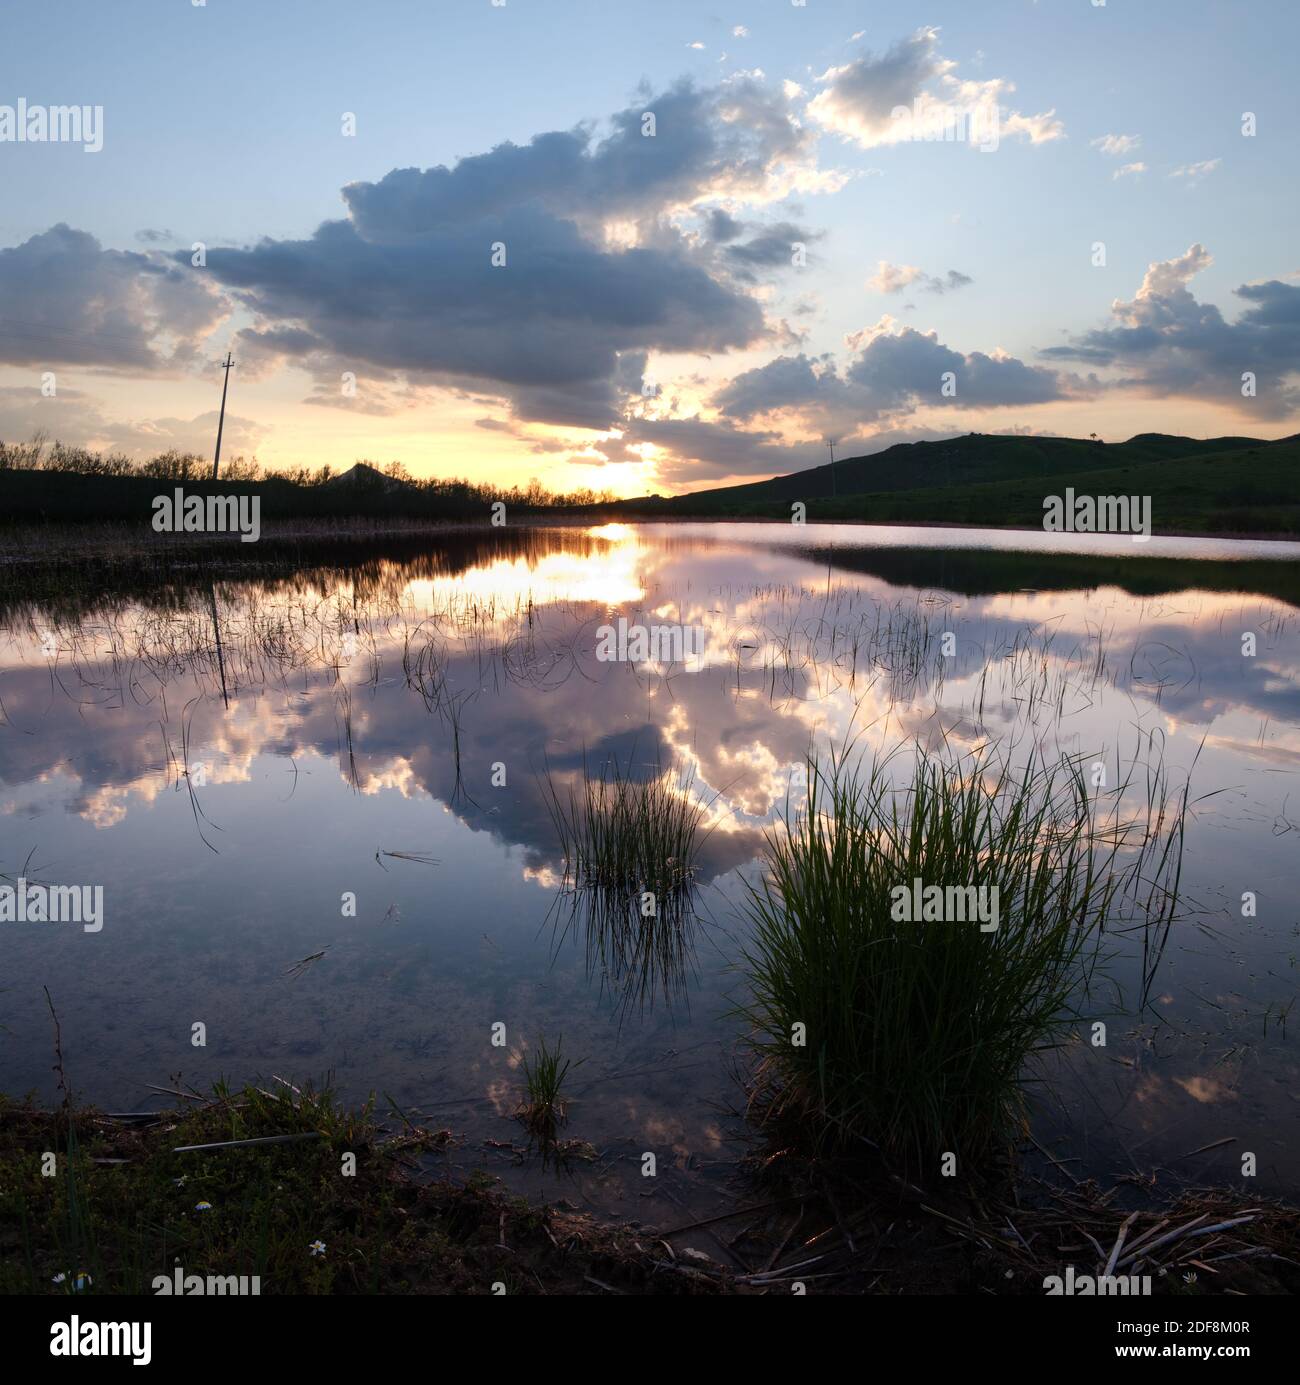 pond with tufts of aquatic plants is reflecting the clouds at the sunset Stock Photo